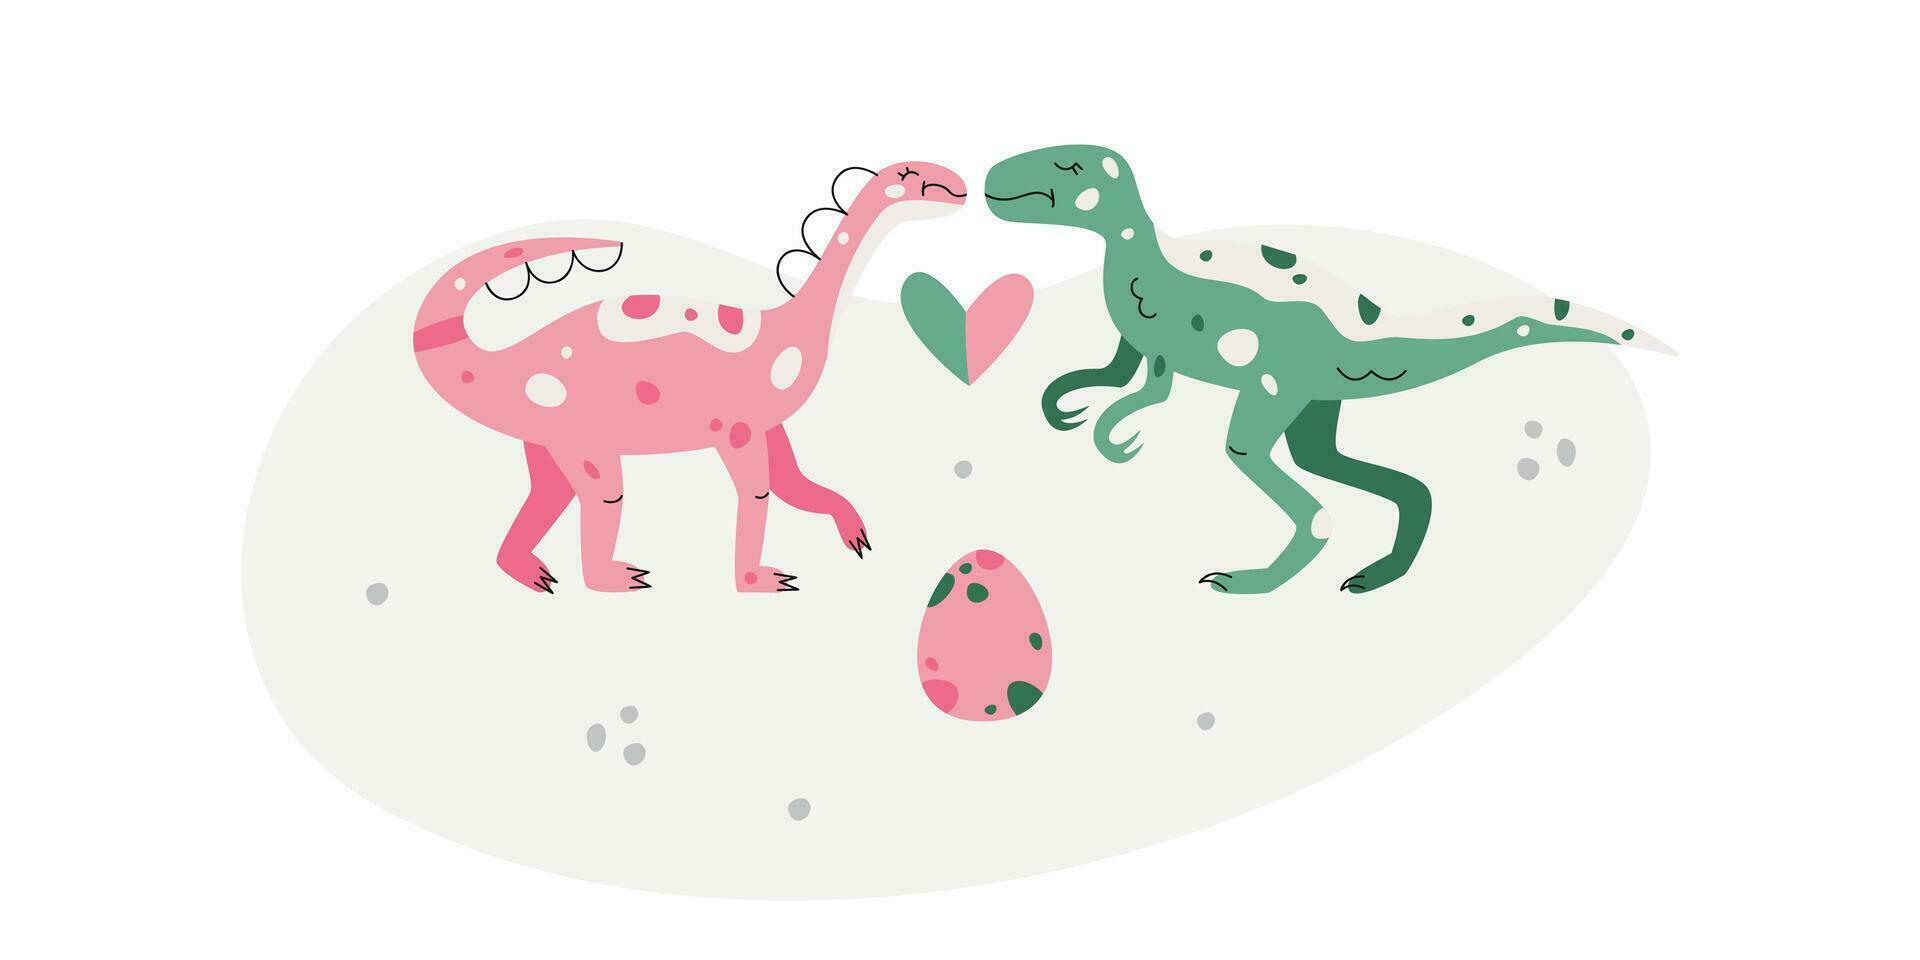 Flat hand drawn vector scene with dinosaur egg and heart